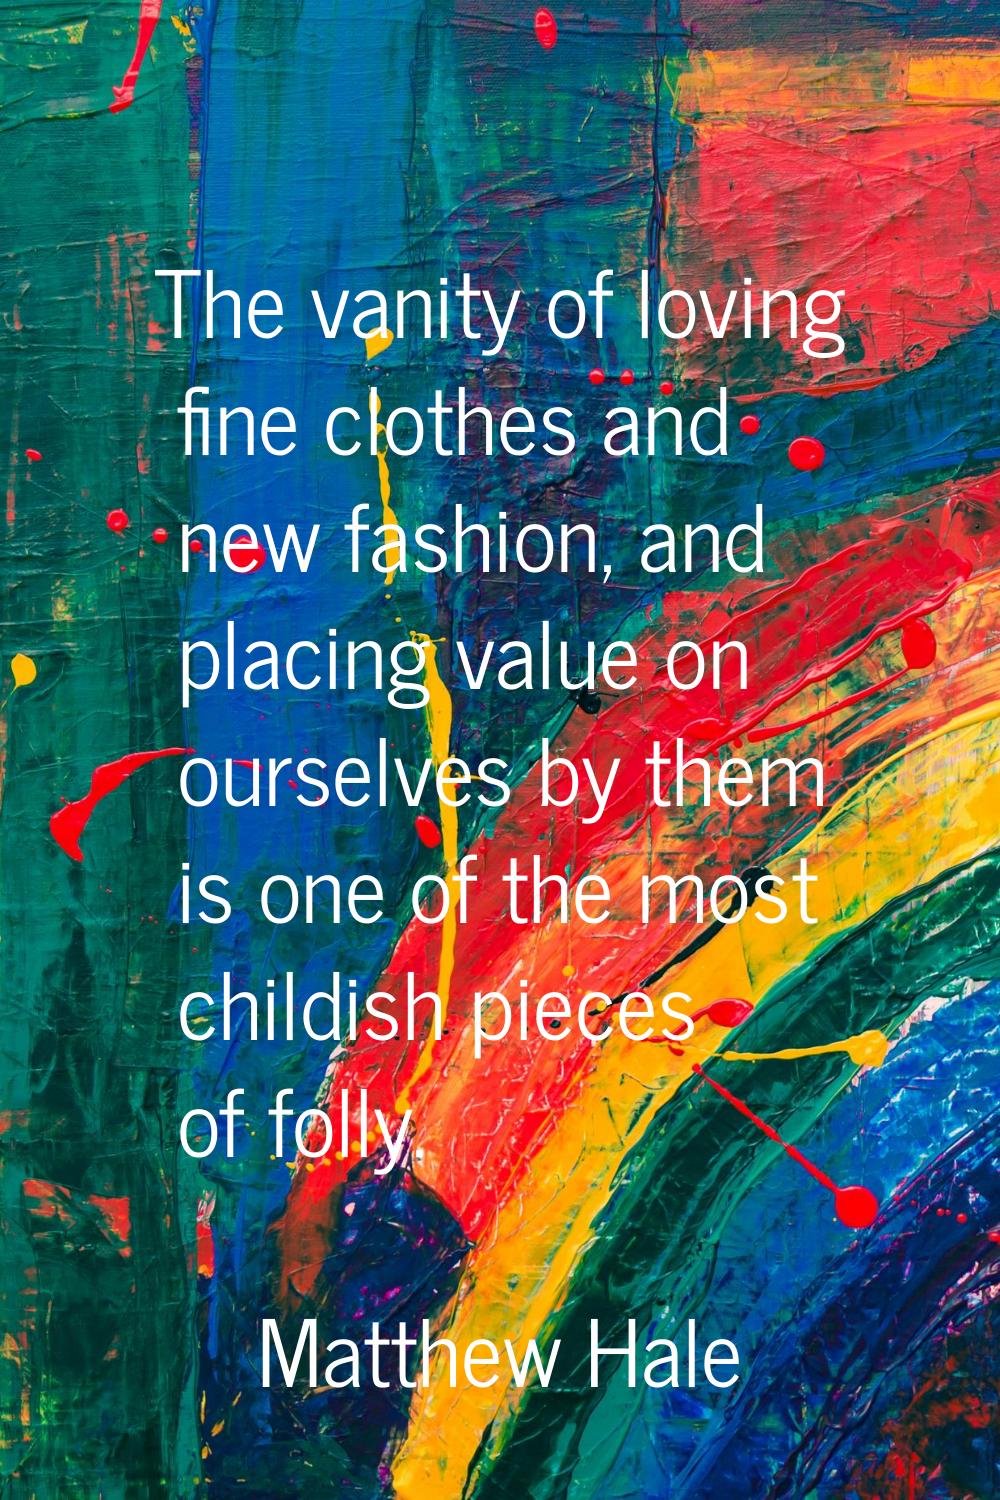 The vanity of loving fine clothes and new fashion, and placing value on ourselves by them is one of